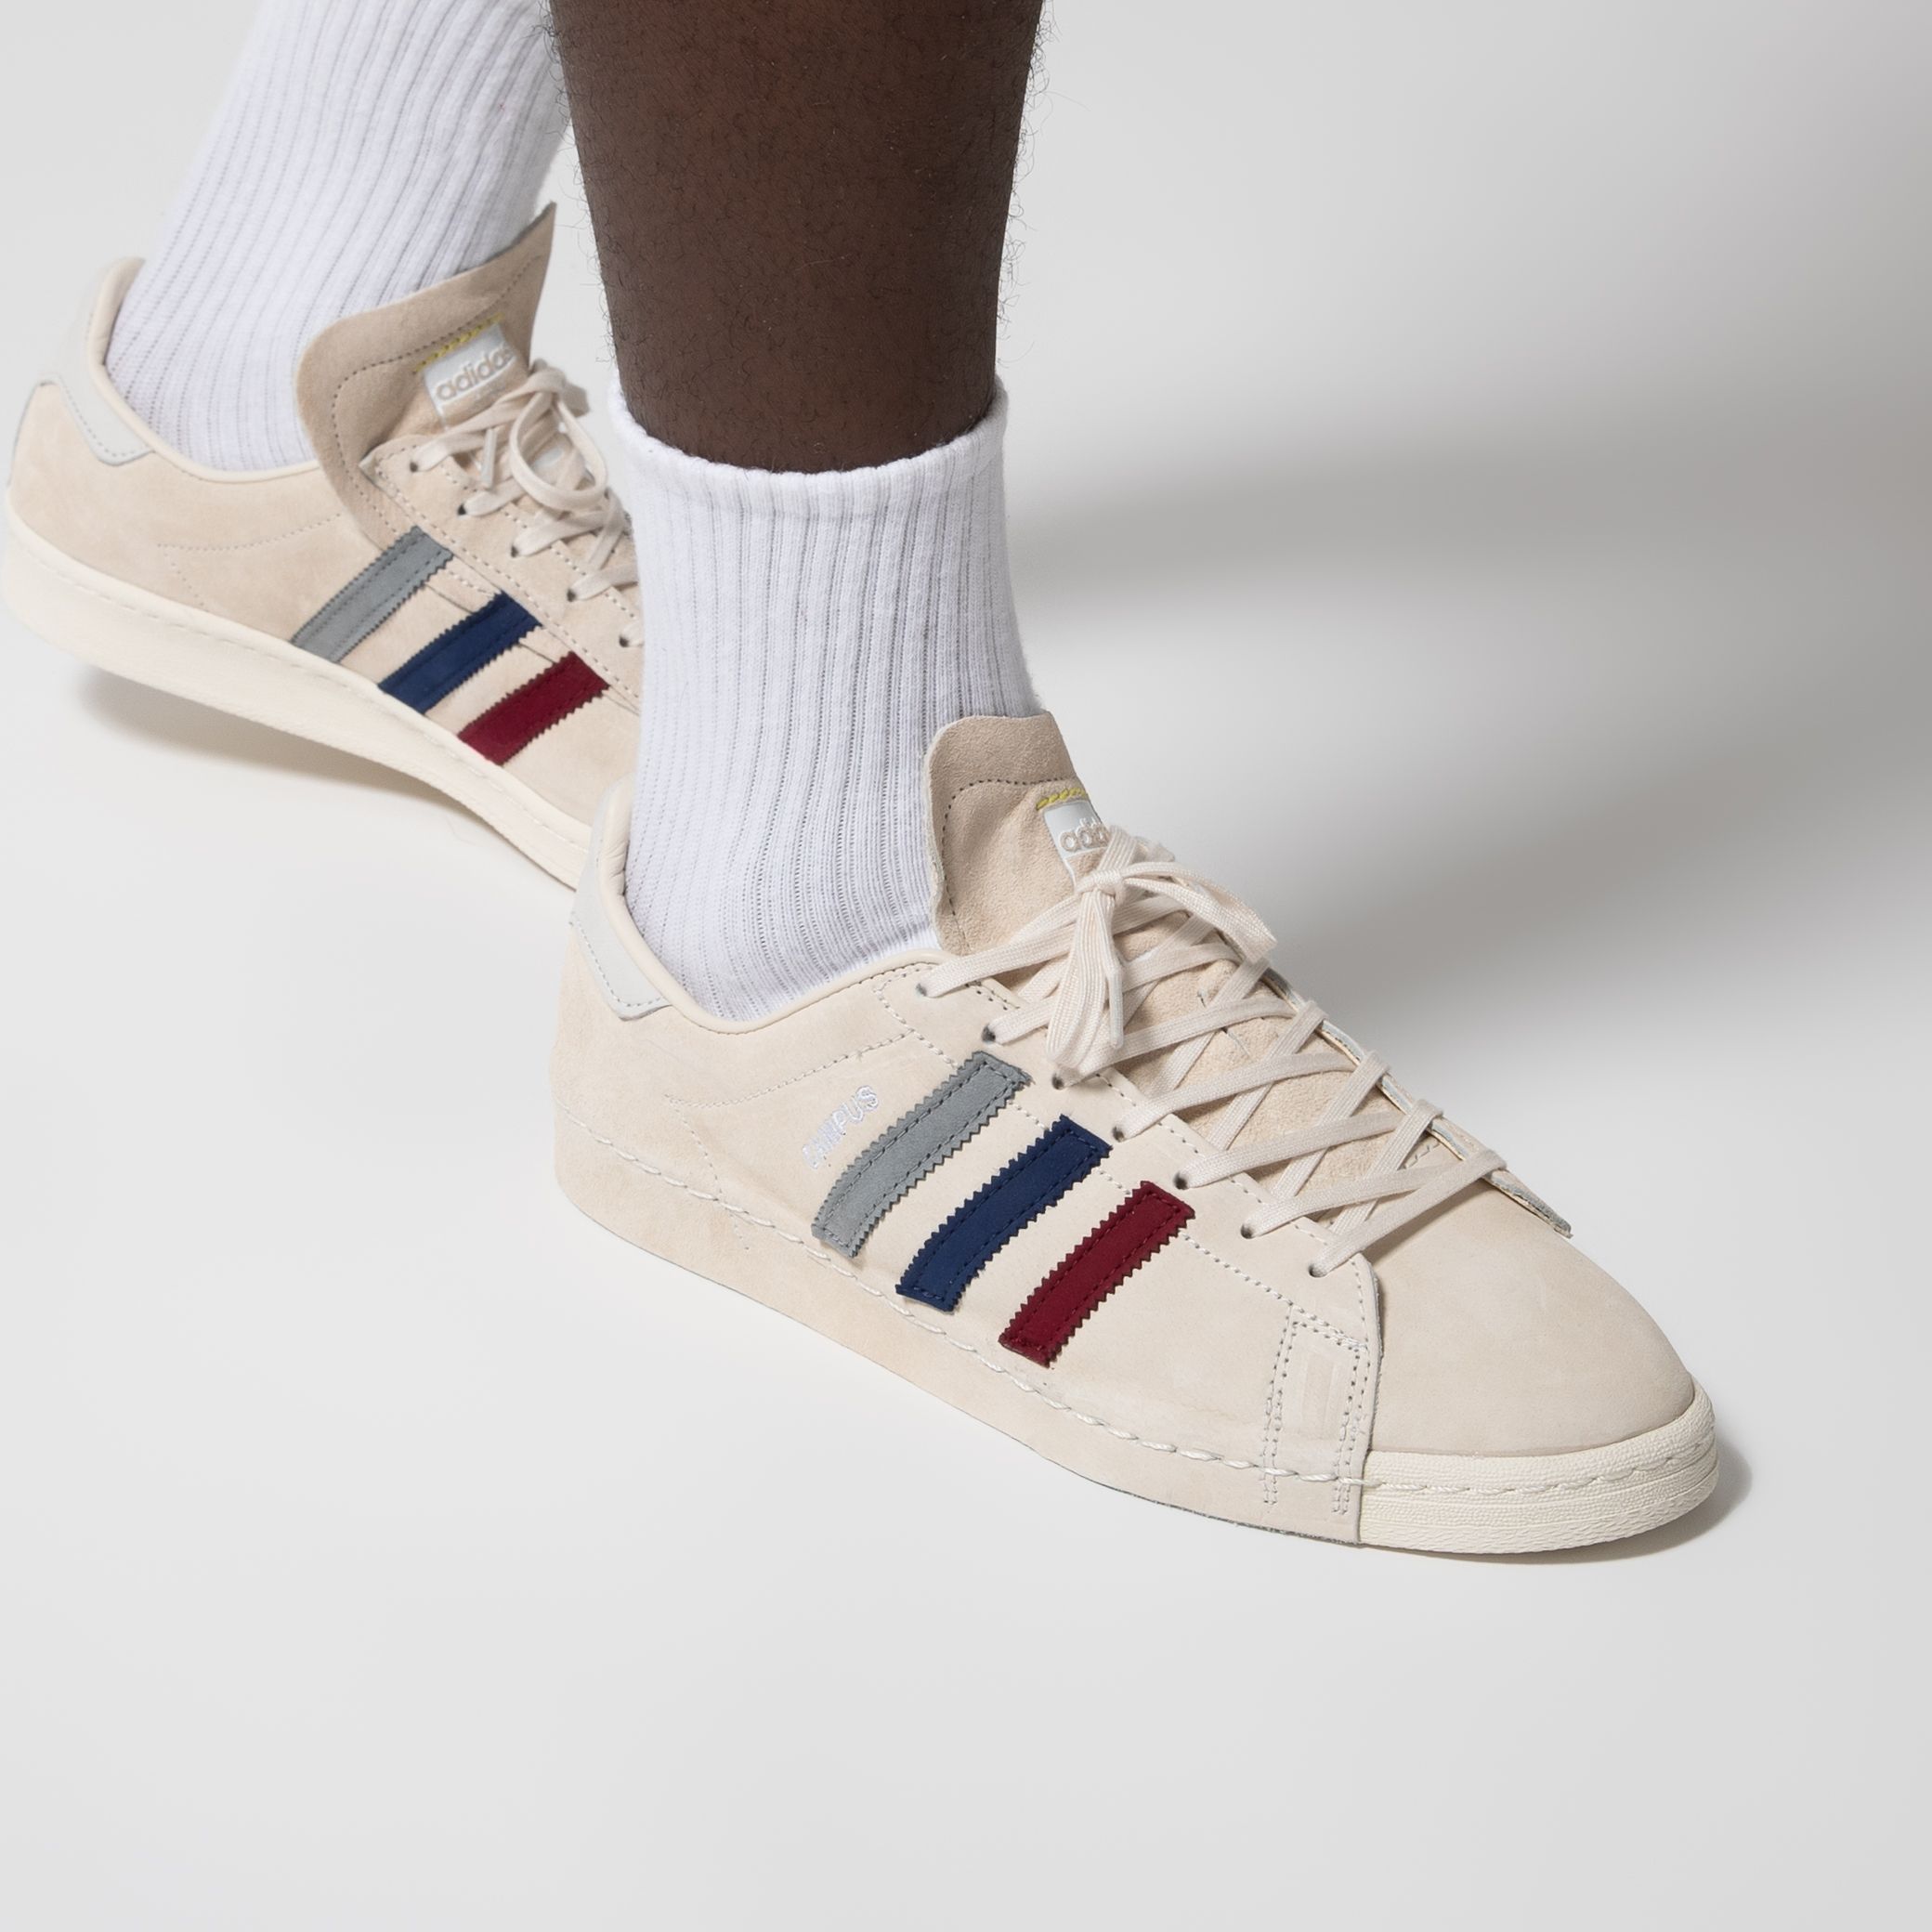 Titolo on Twitter: "ONLINE NOW 🔥 Recouture x Adidas Consortium Campus 80S check it out ➡️ https://t.co/7JB2dOYFLc 🏃🏾UK 7 2/3) - UK 11 (46) Recouture is an experimental repair and